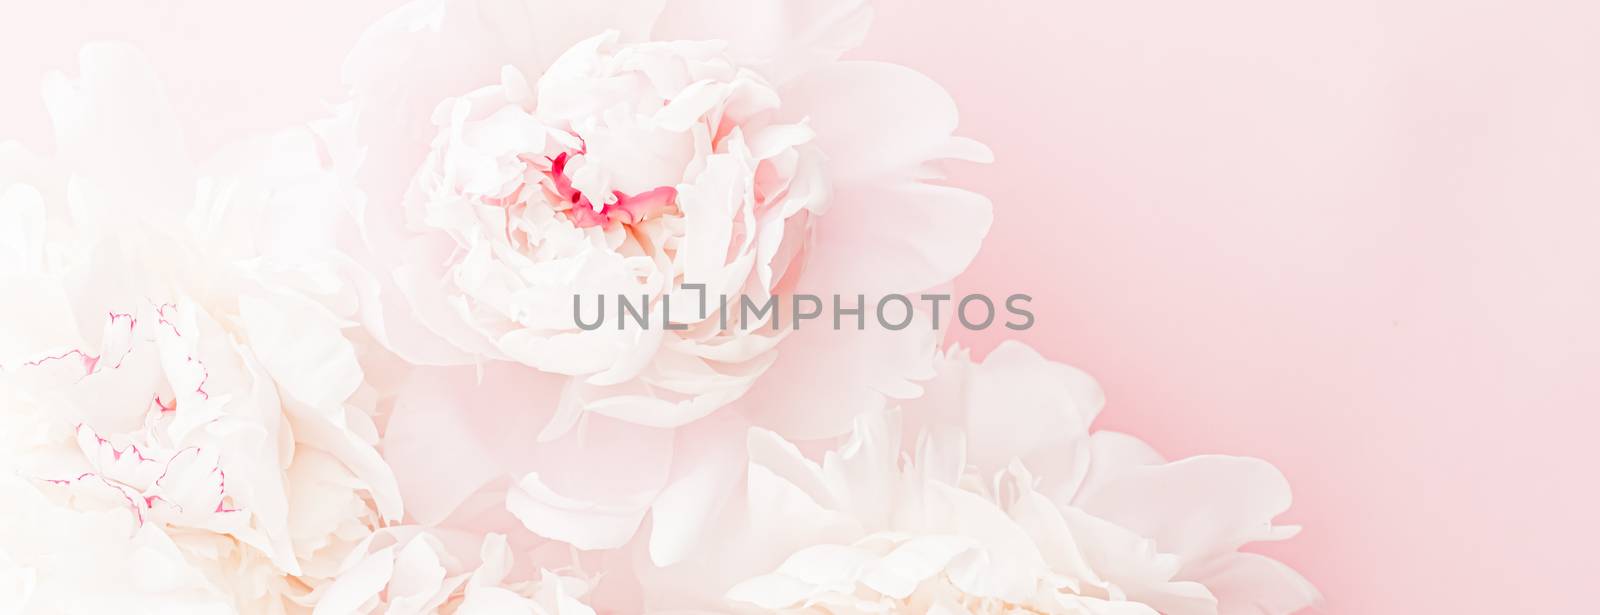 Peony flowers in bloom as floral art on pink background, wedding flatlay and luxury branding design